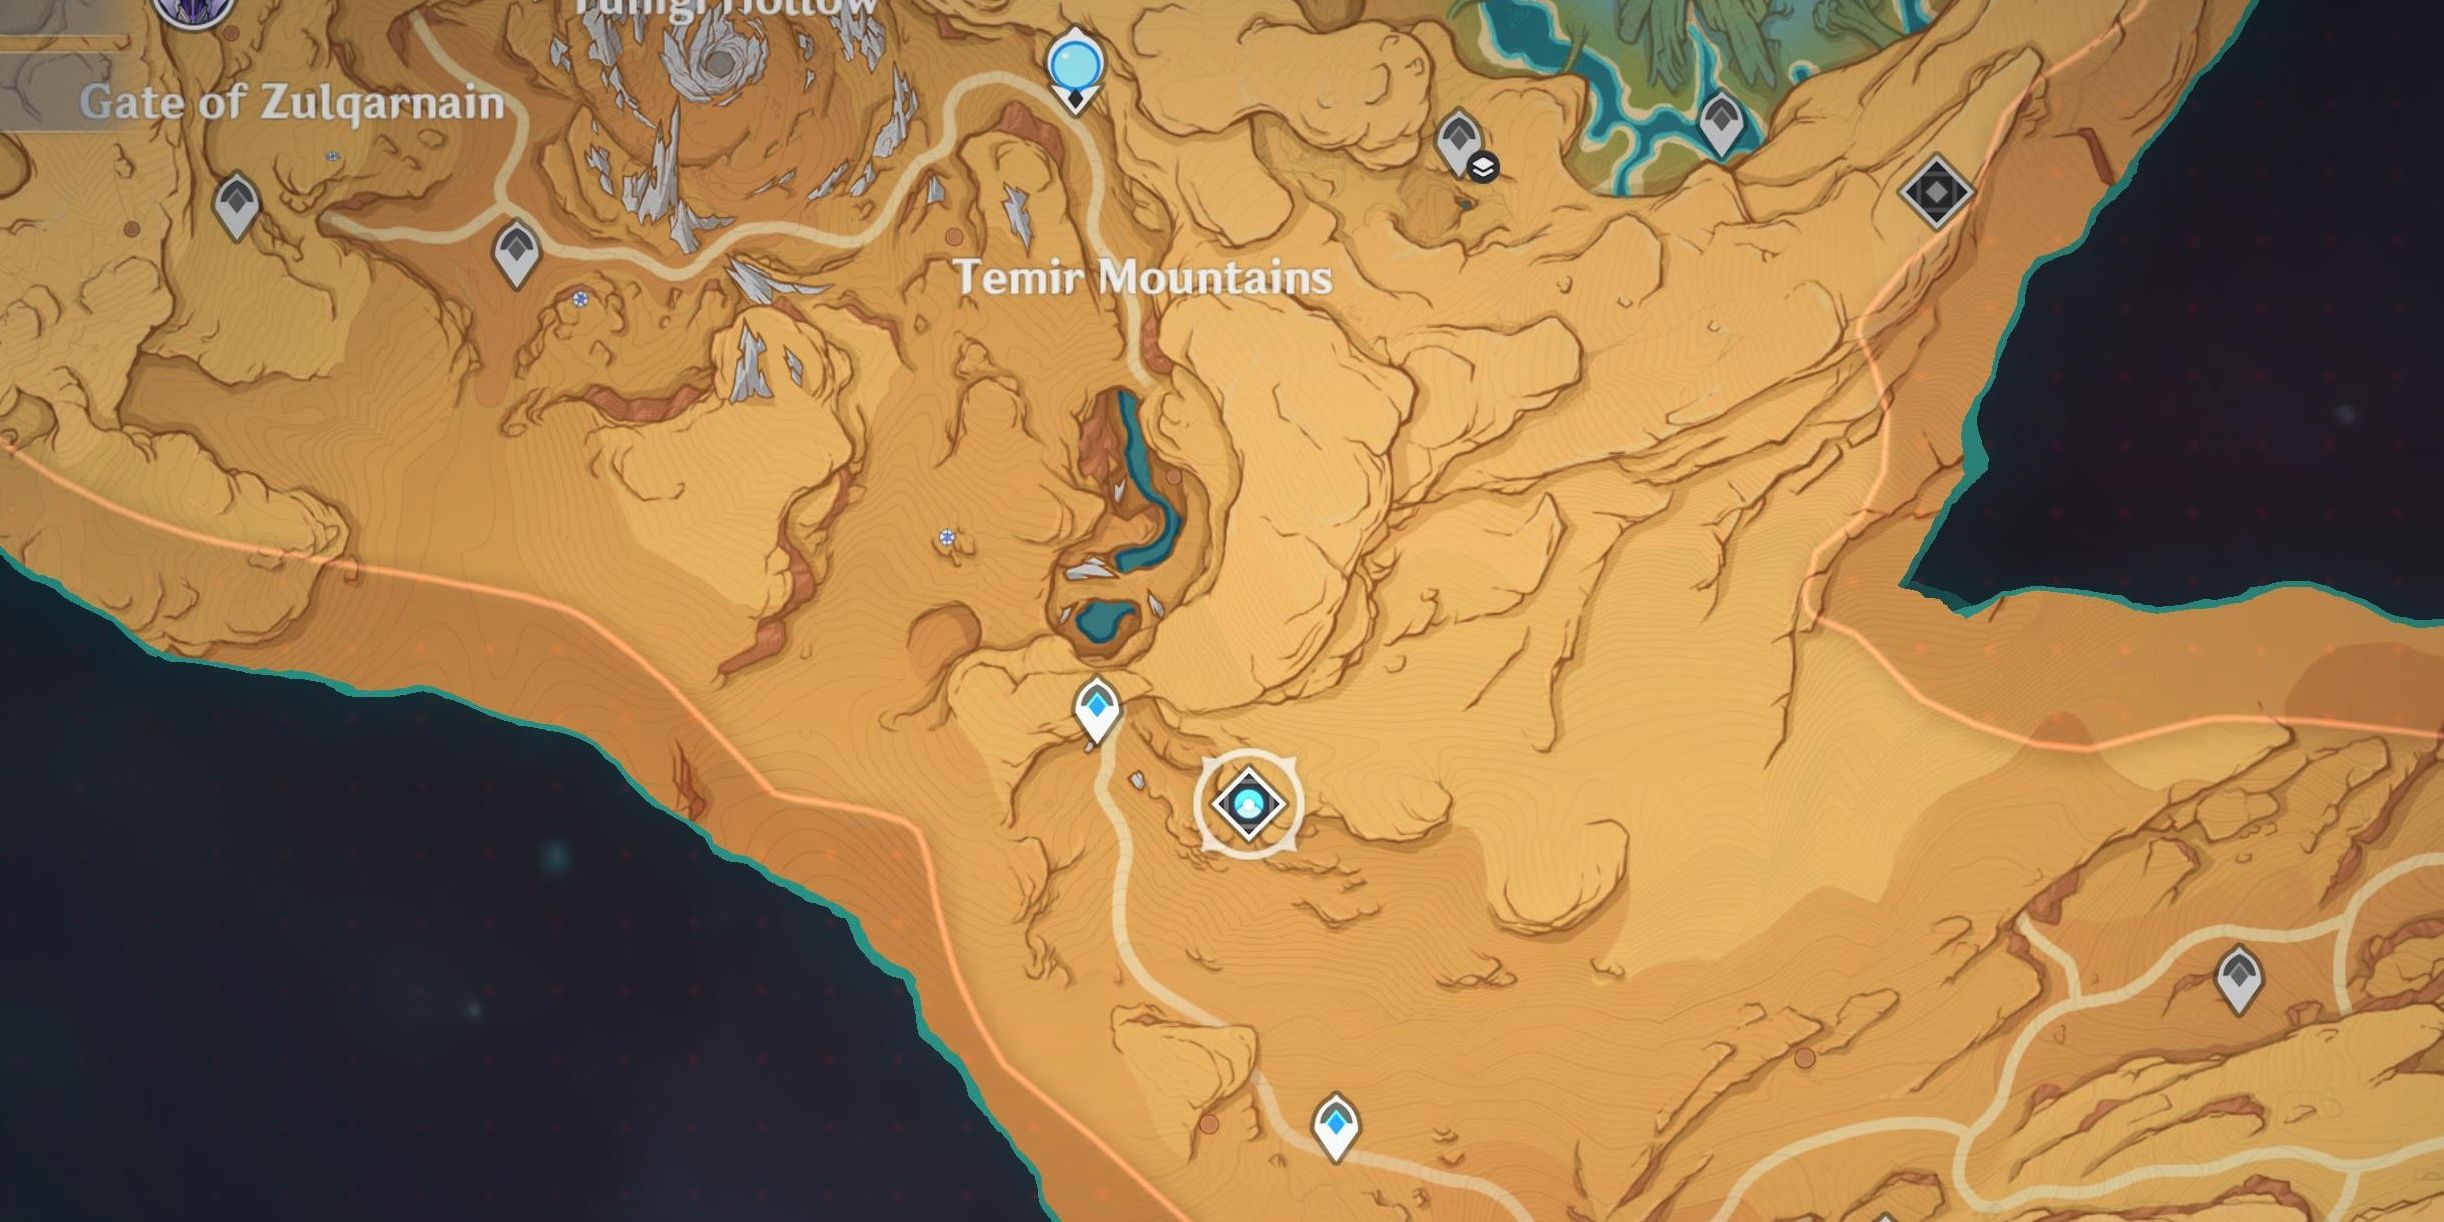 Genshin Impact Map of Temir Mountains Showing Location of Molten Iron Fortress